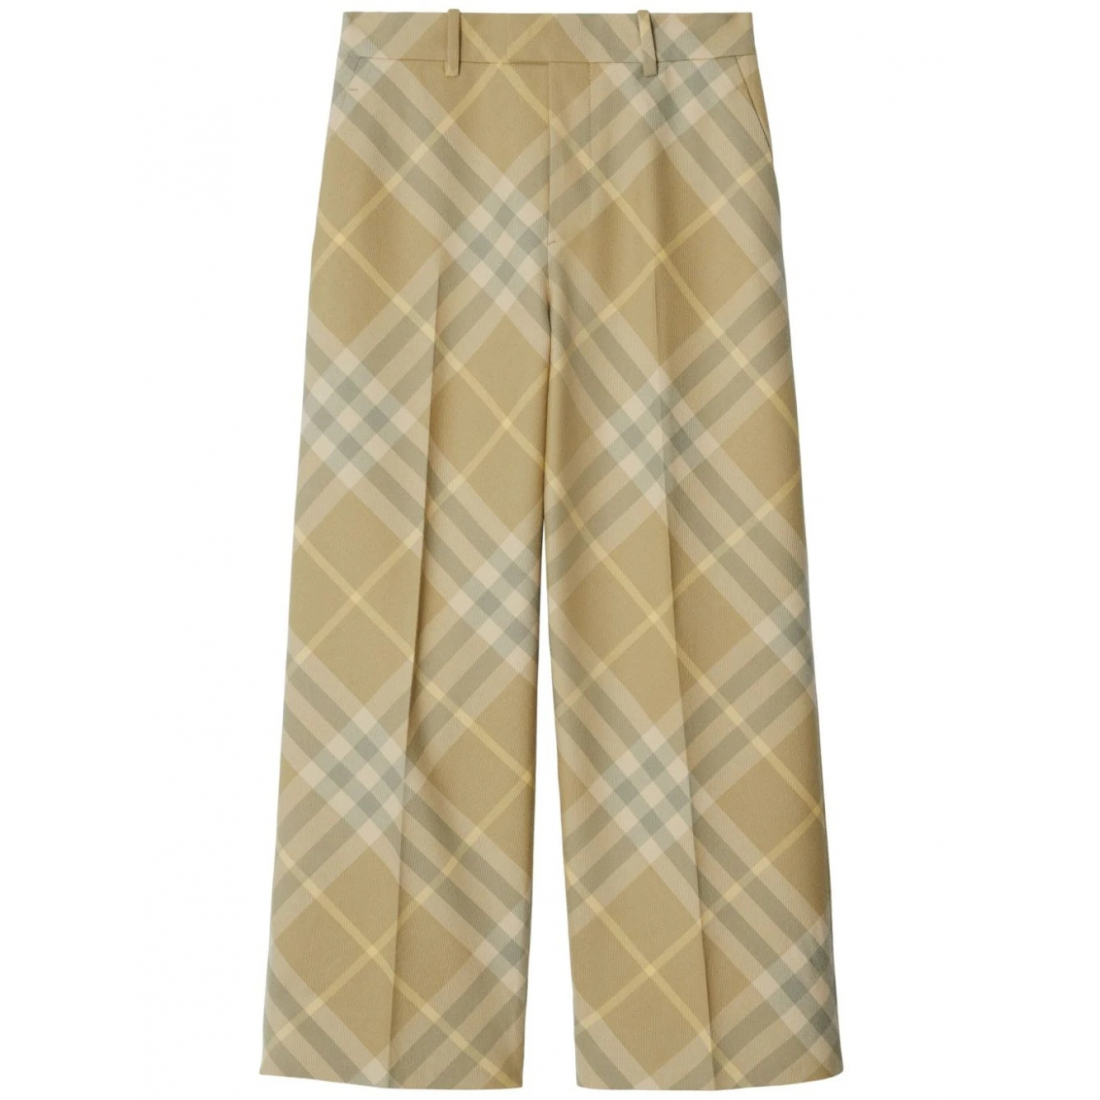 Women's 'Check-Print Tailored' Trousers